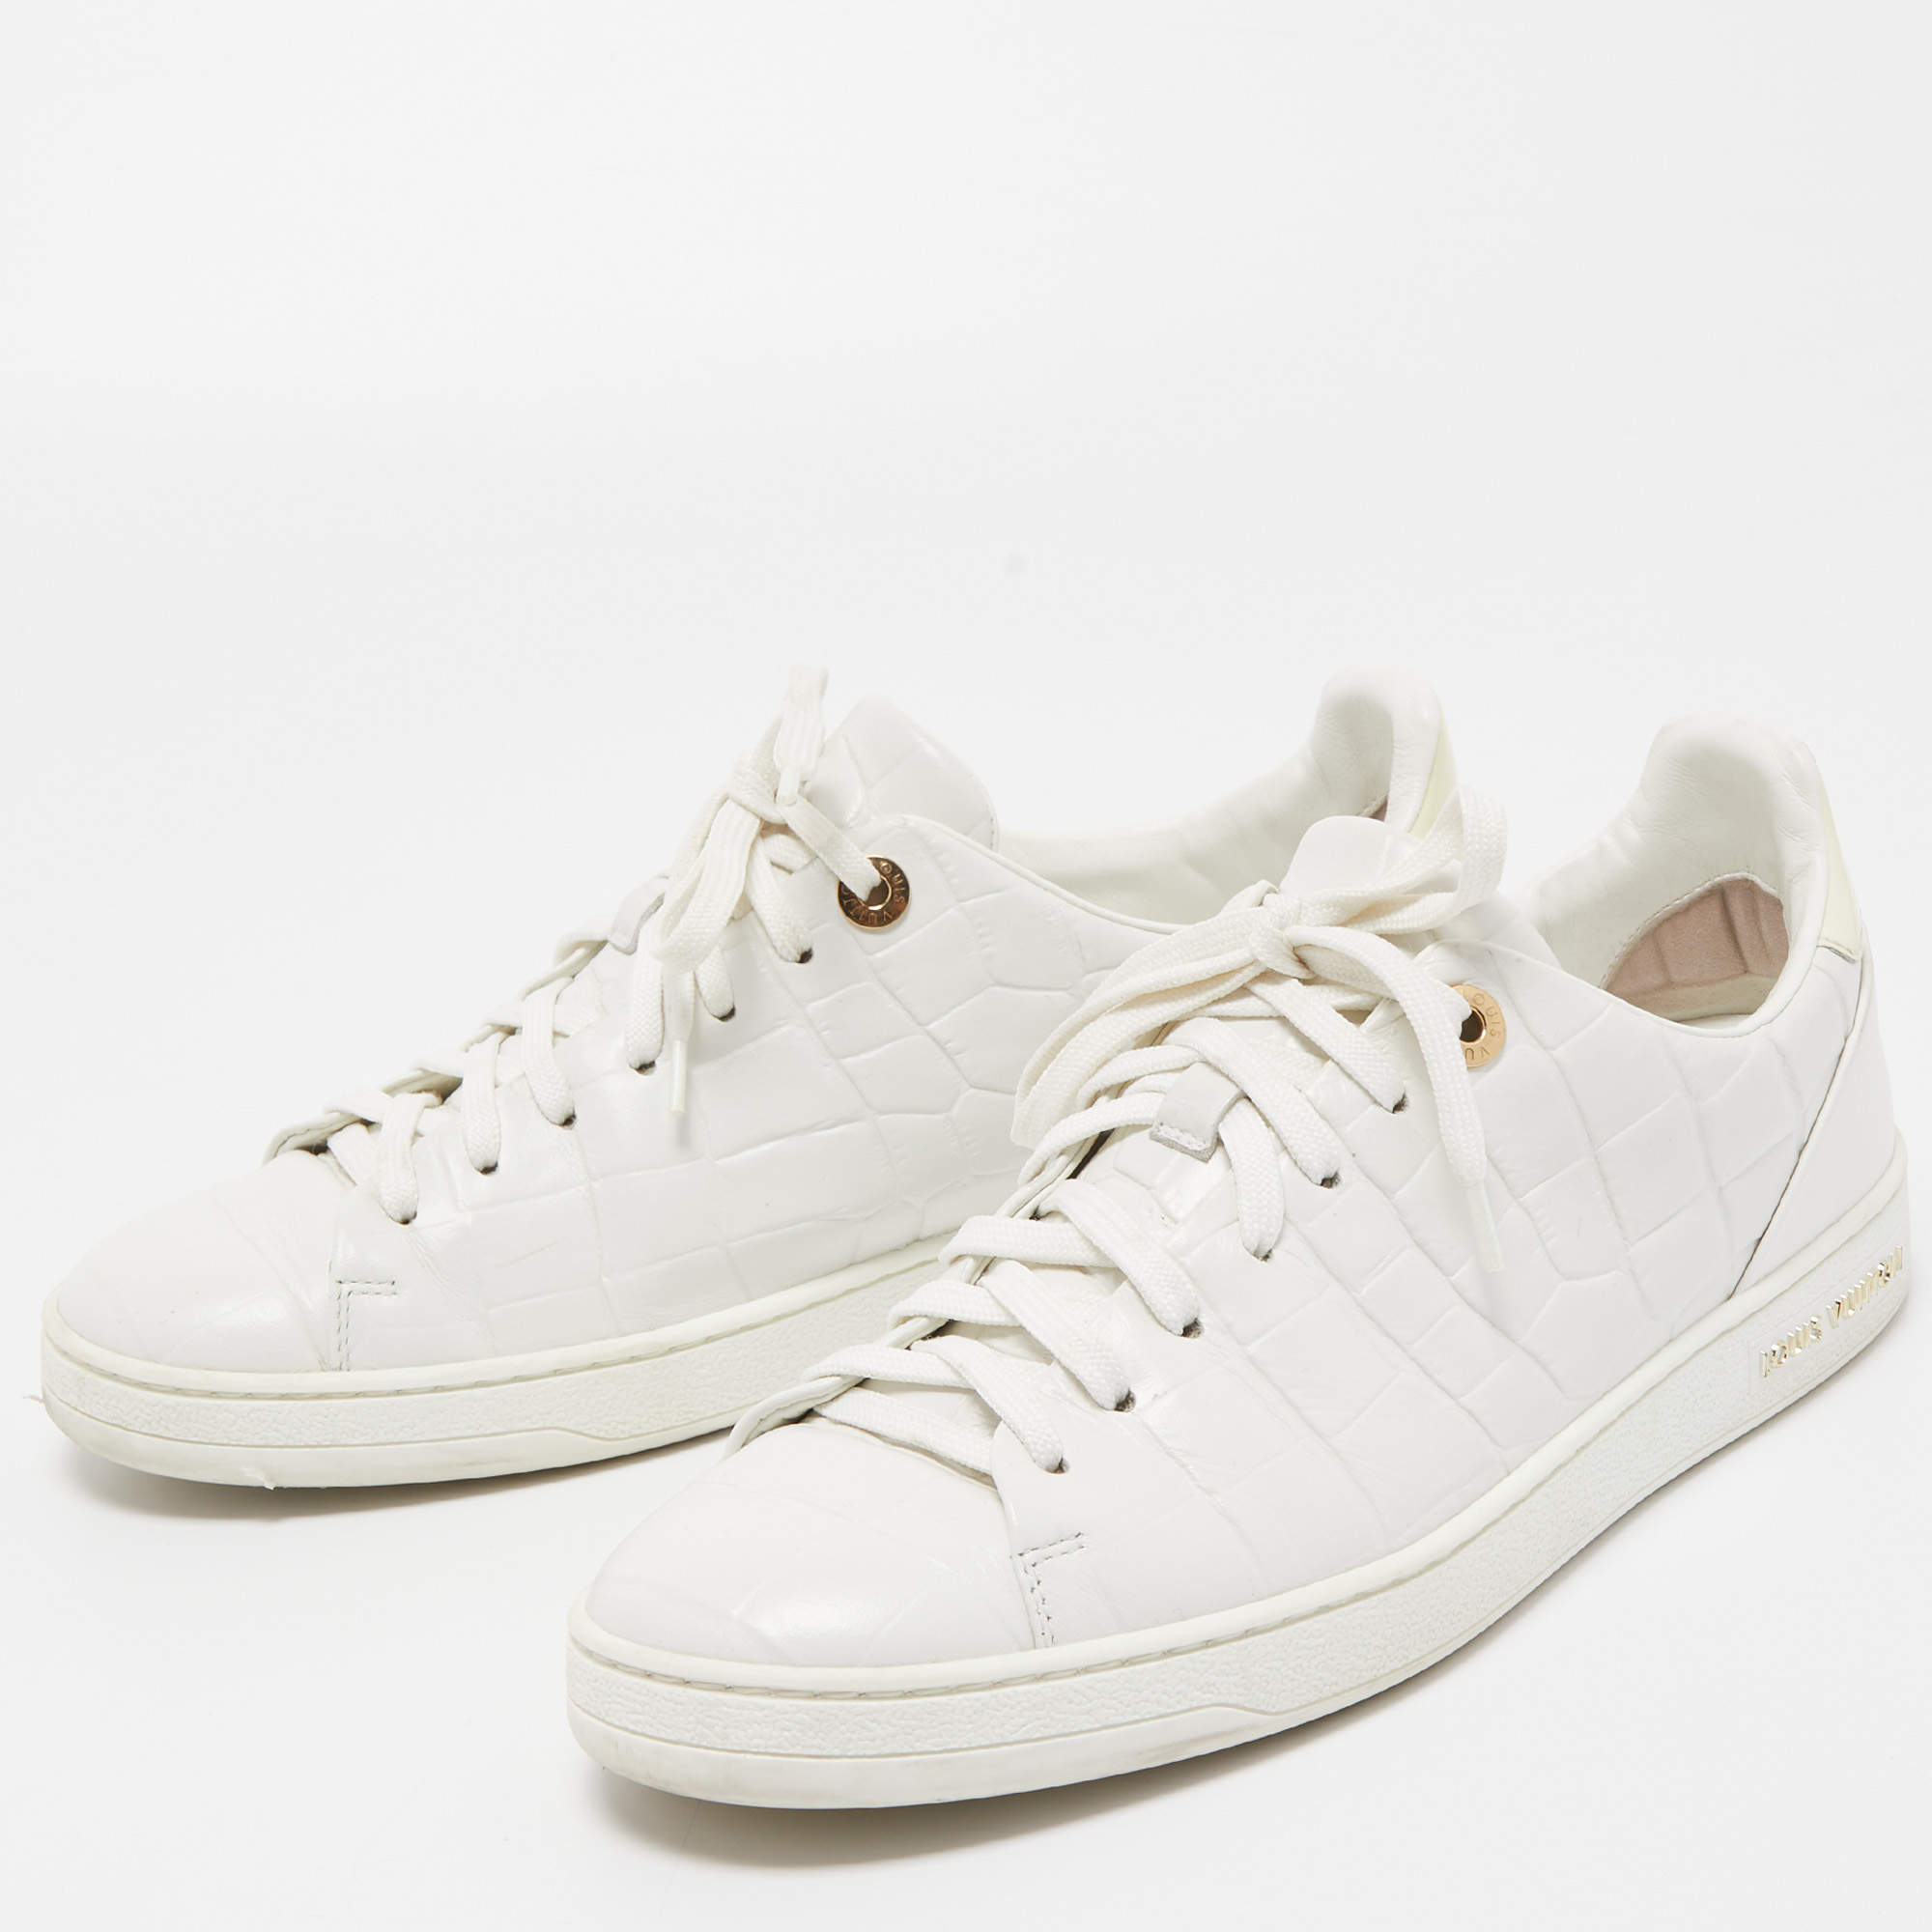 Products by Louis Vuitton: Frontrow Sneaker